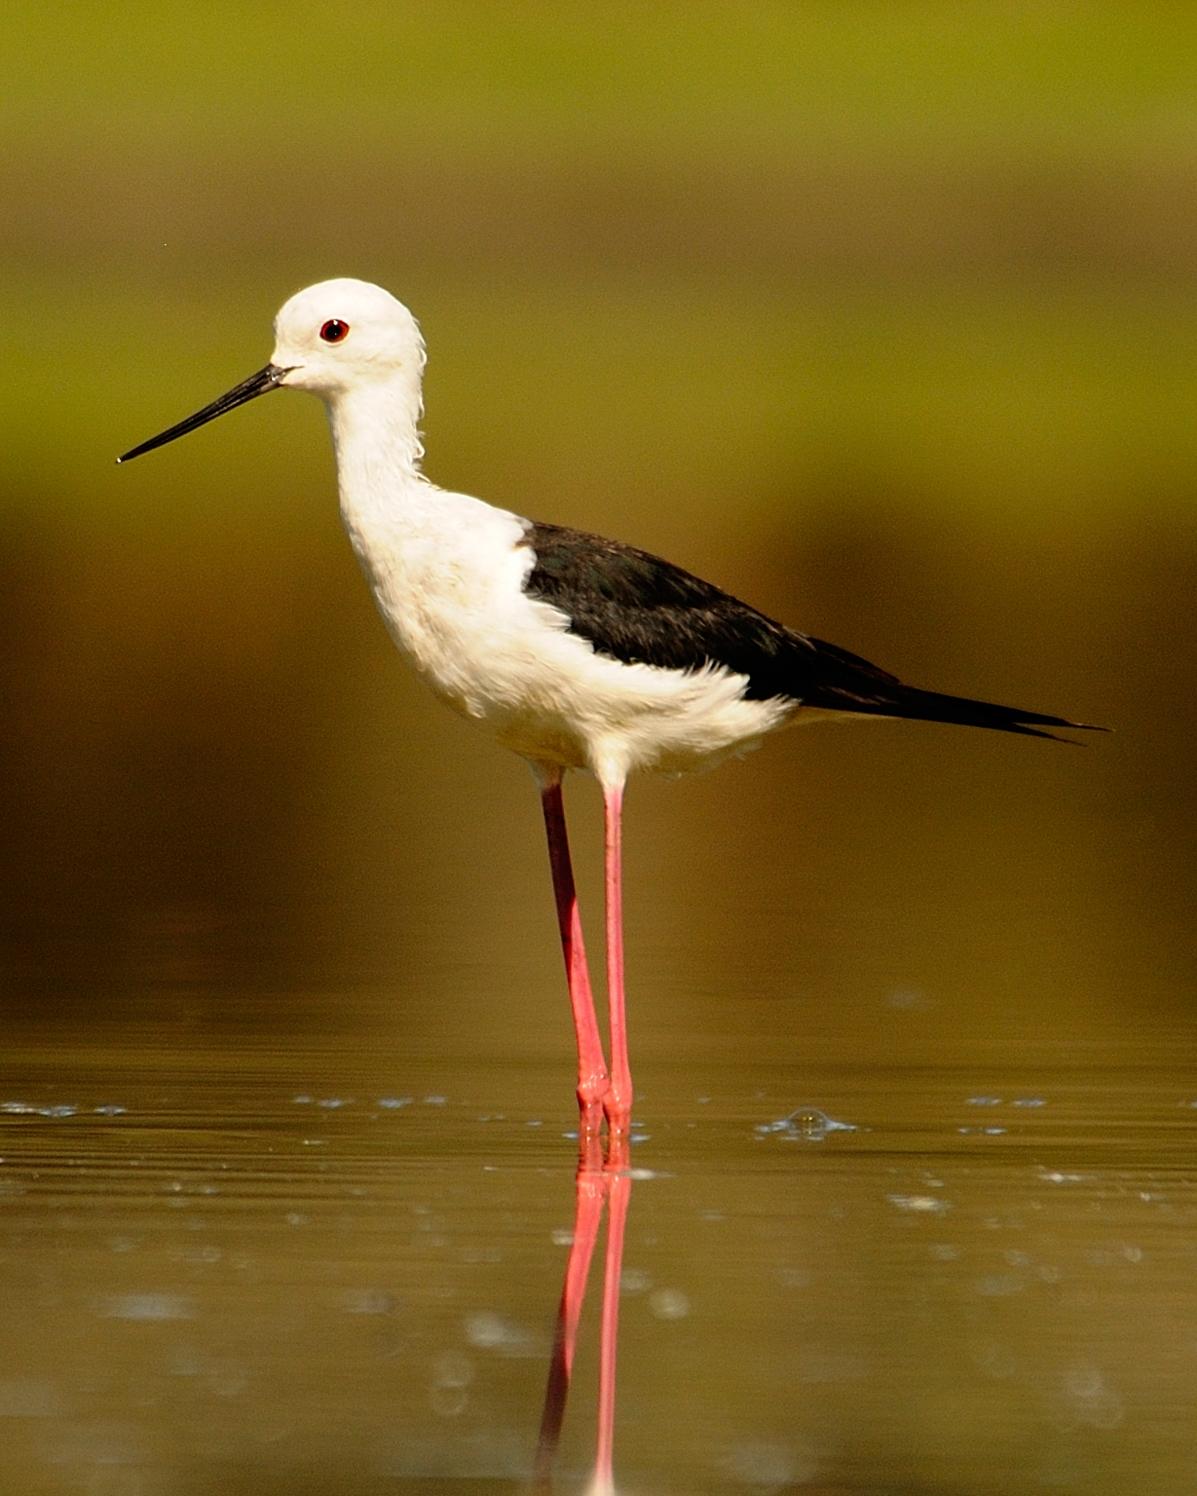 Black-winged Stilt Photo by Andres Rios